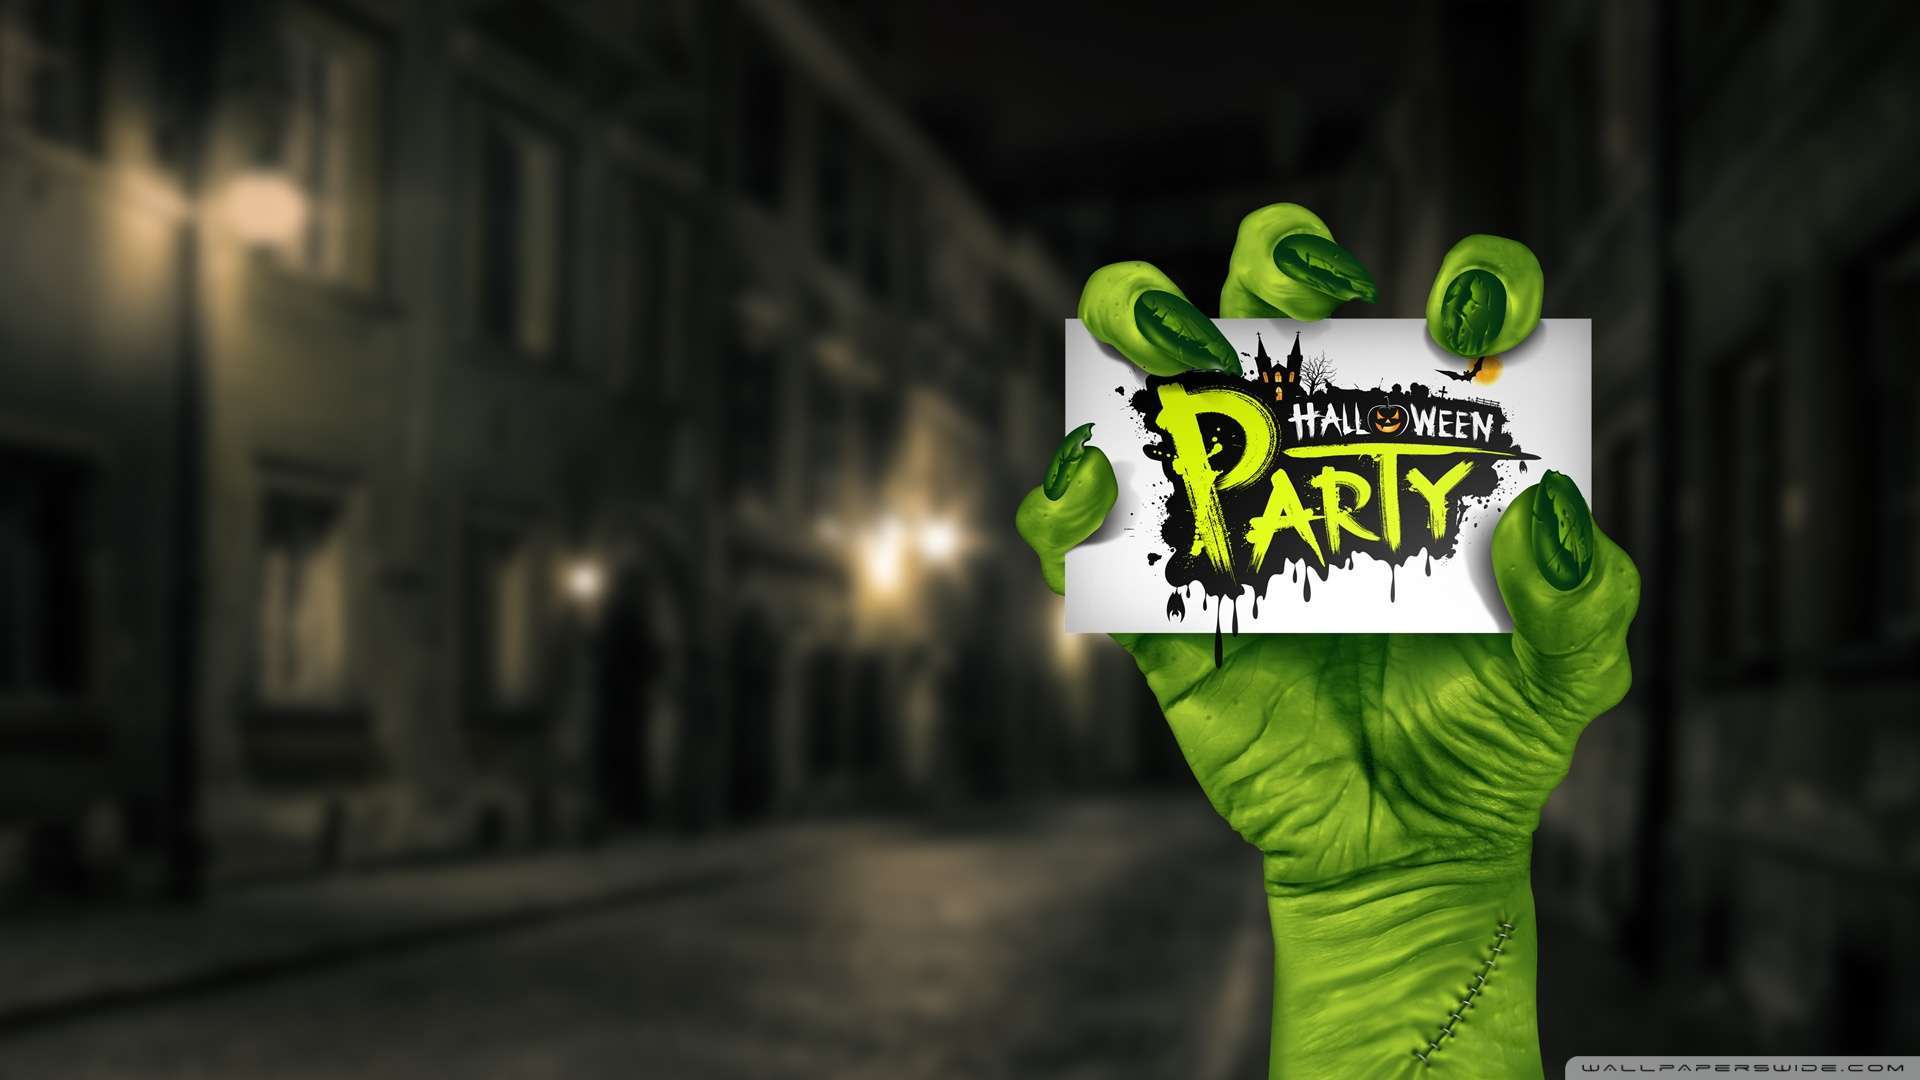 Wallpaper Halloween Party 1080p HD Upload At January